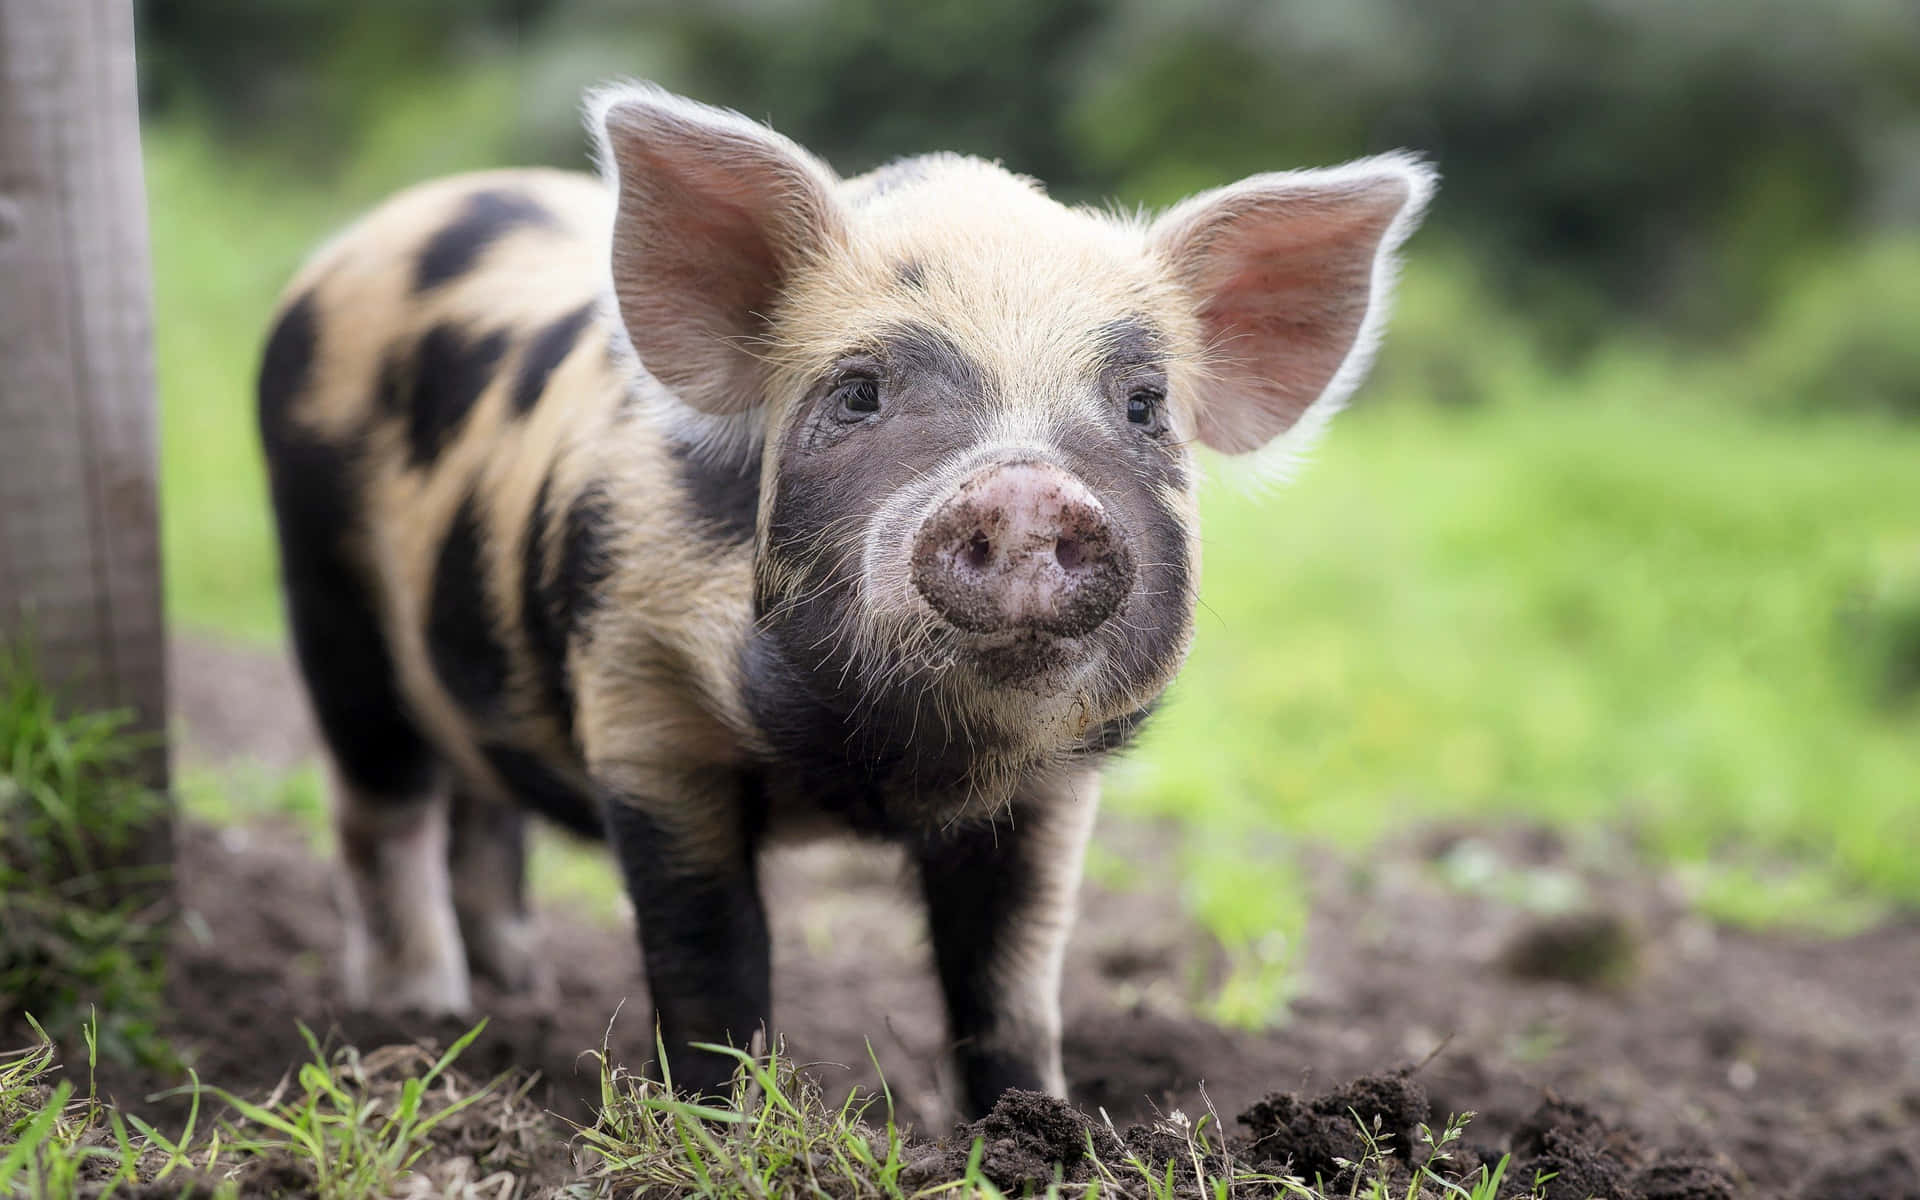 A Pig Standing In The Dirt Near A Fence